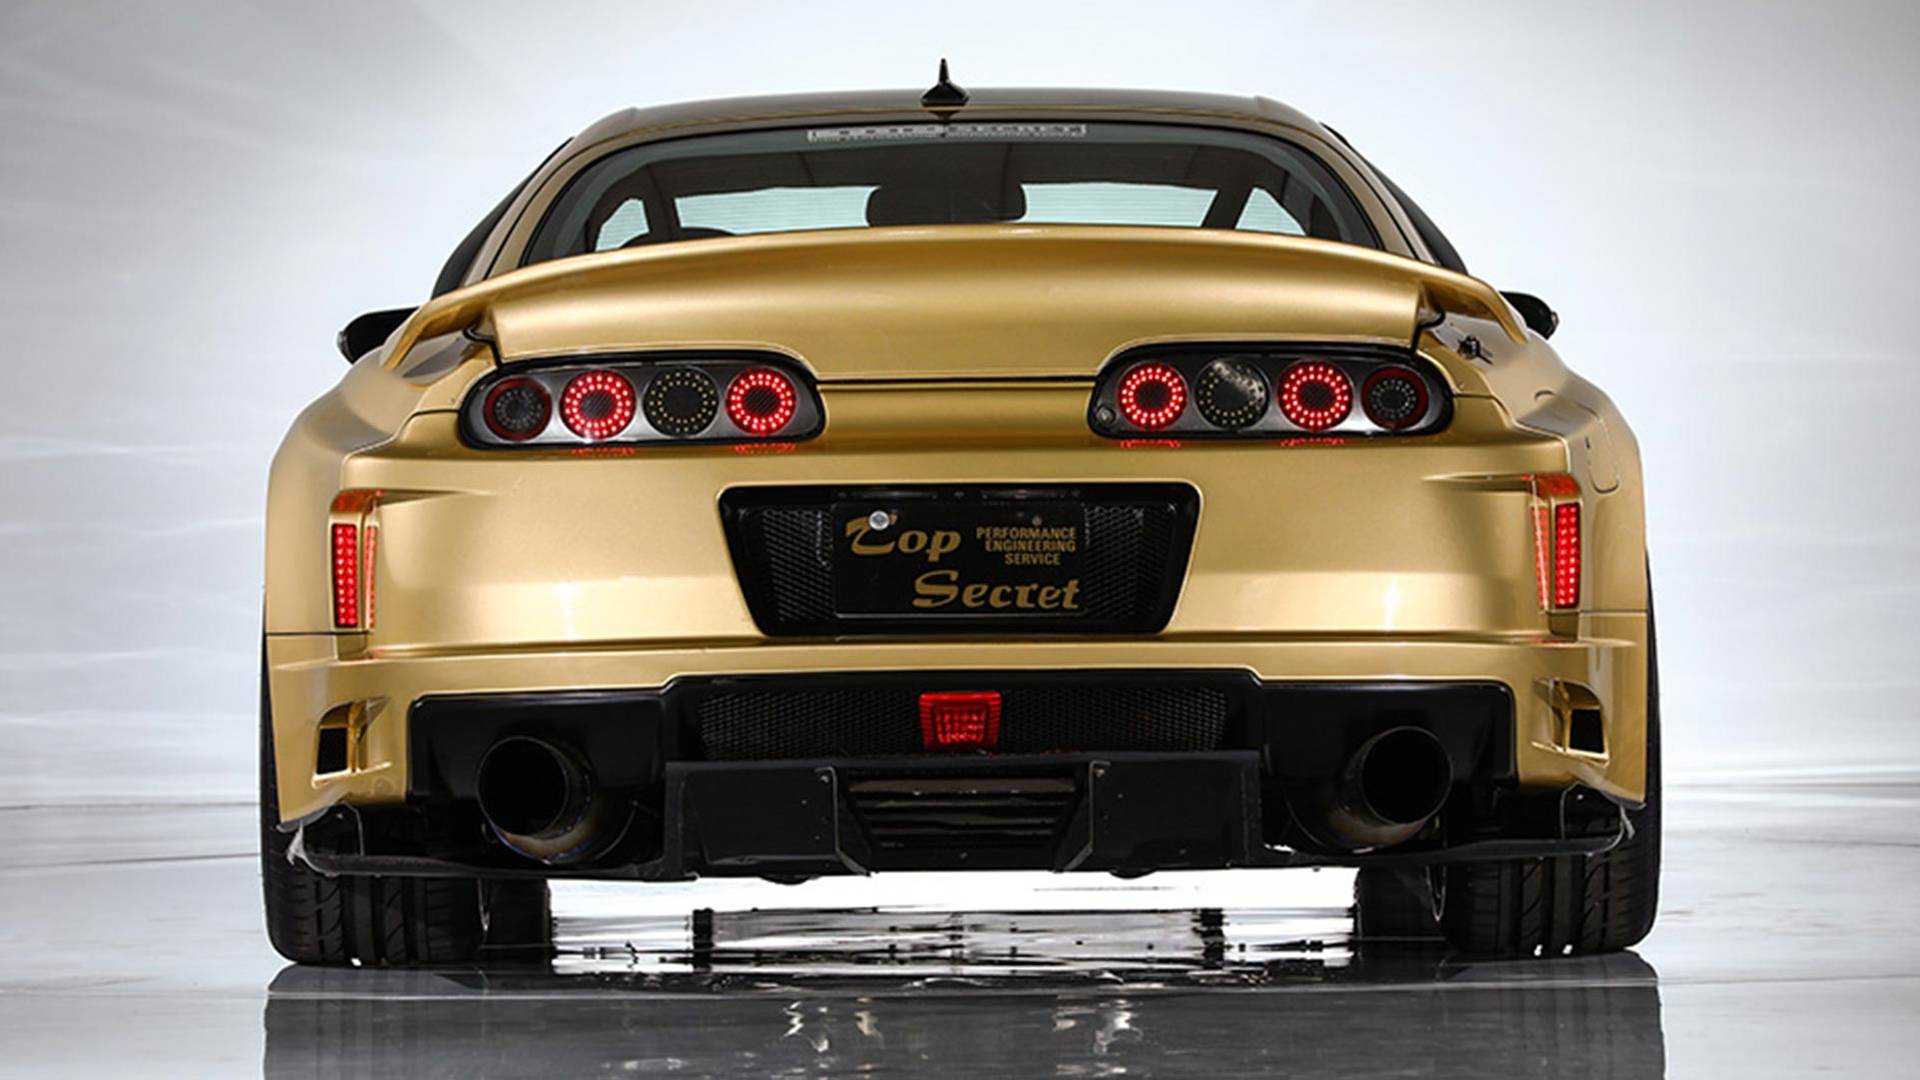 Spend 30 Minutes With The Elusive V12 Toyota Supra